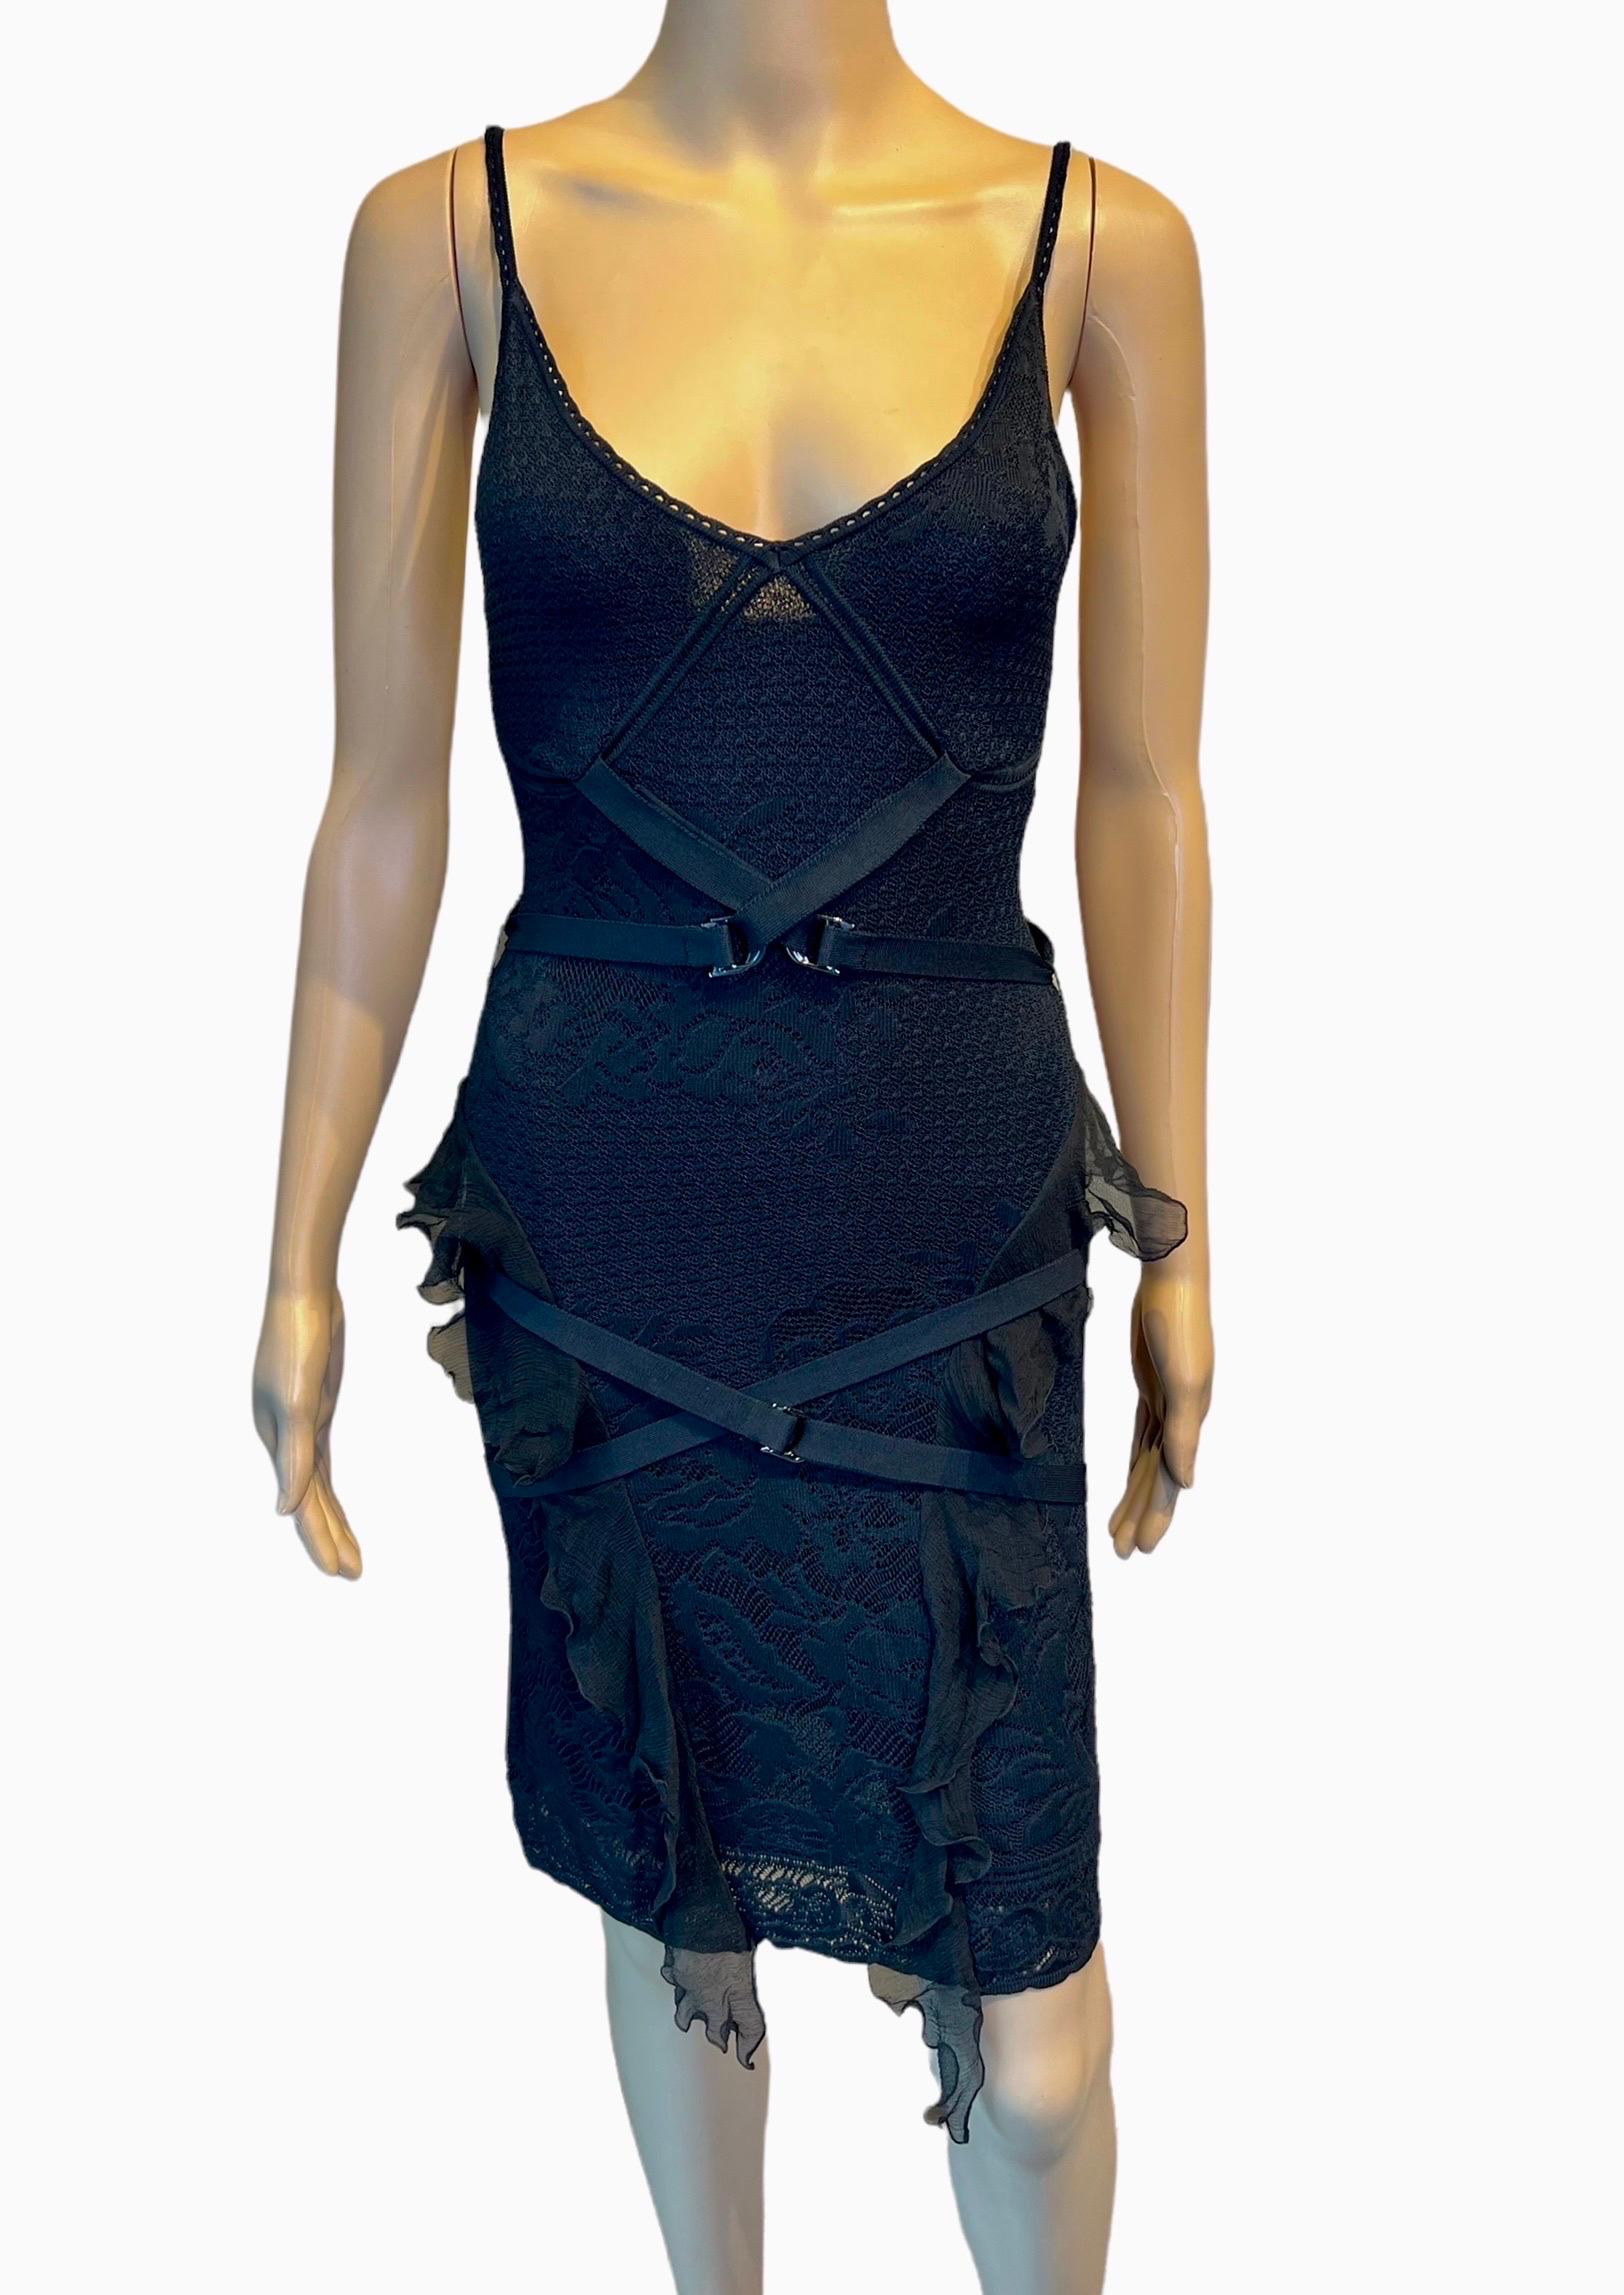 Christian Dior by John Galliano S/S 2003 Sheer Lace Bondage Knit Black Dress  For Sale 4